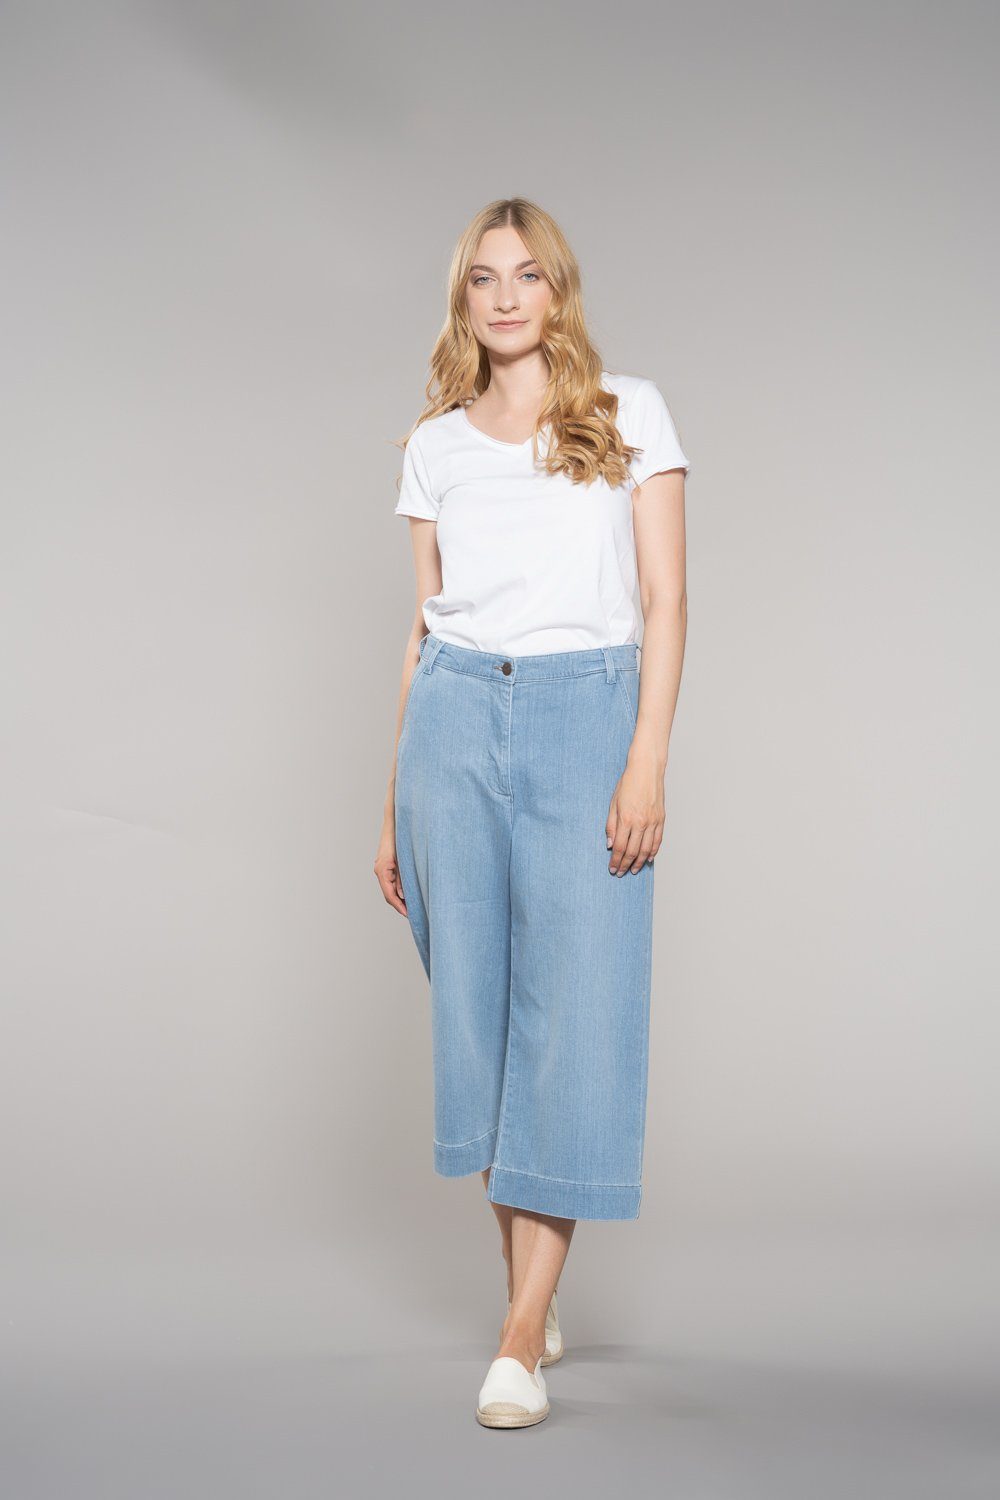 Feuervogl Weite Jeans fv-Fred:rika, Weites Bein, Hohe Taille, Culotte Jeans, Hyperflex 5-Pocket-Style, High Waist, Culotte Jeans Summersky